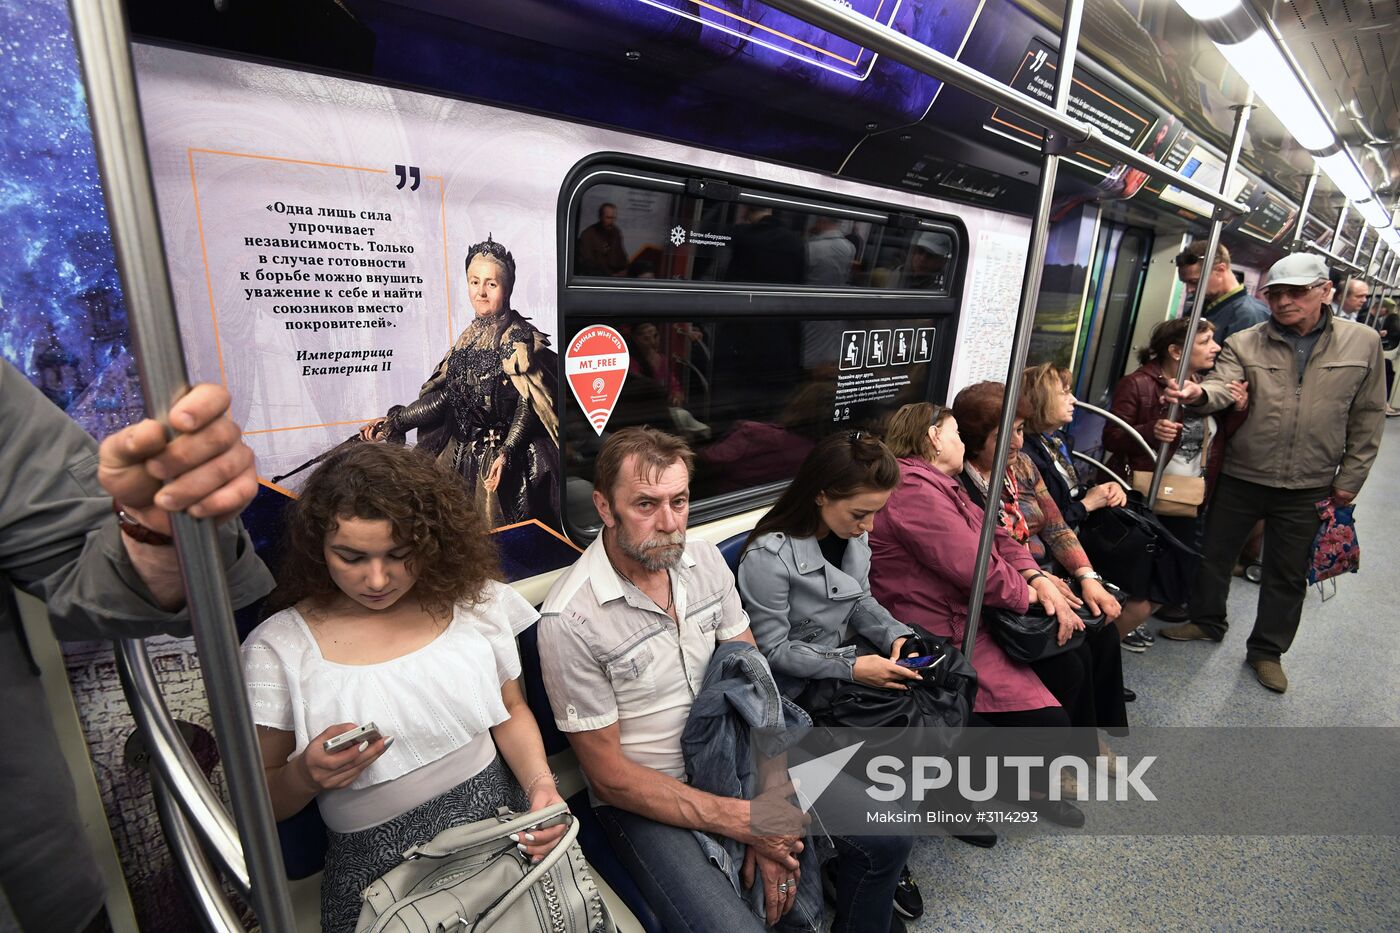 "Russia: My History" metro train launched